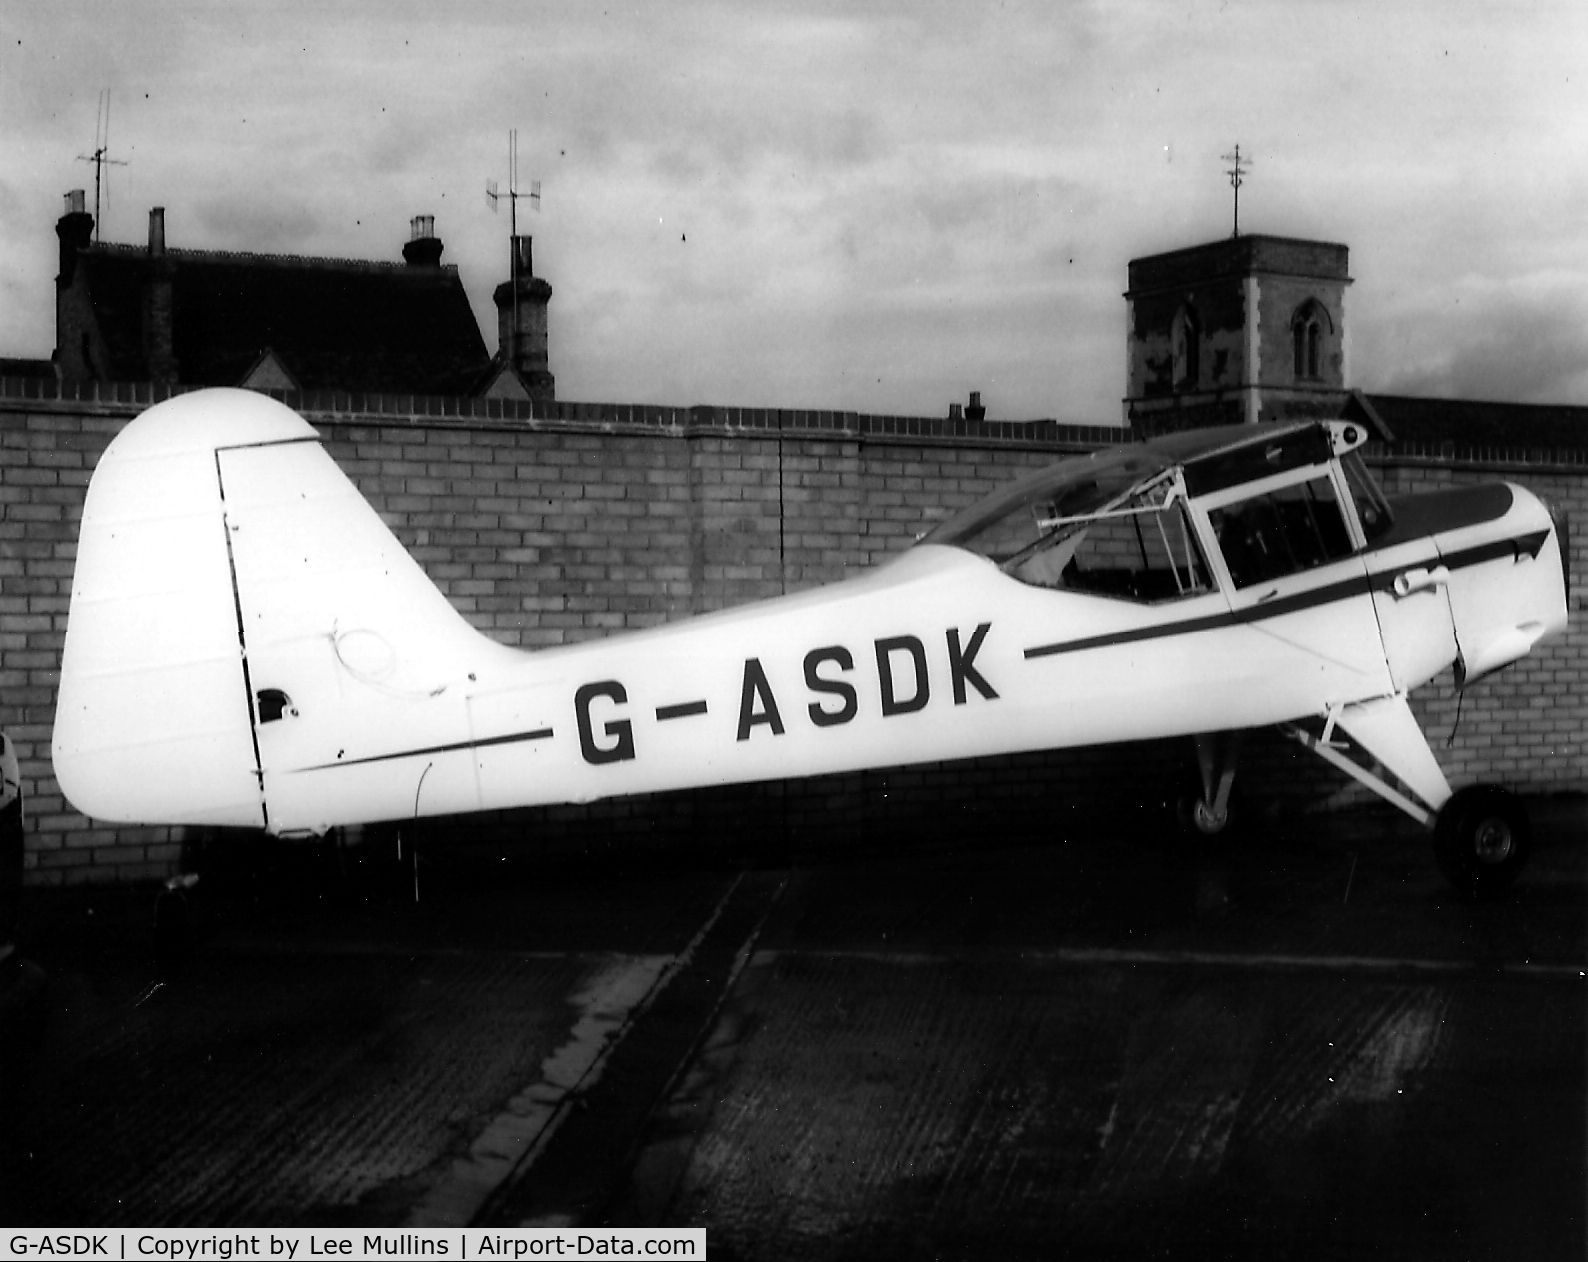 G-ASDK, 1962 Beagle A-61 Terrier 2 C/N B.702, The Terrier after painting. The nose cone was not painted as it was hoped to get a better one and paint it afterwards. C1987